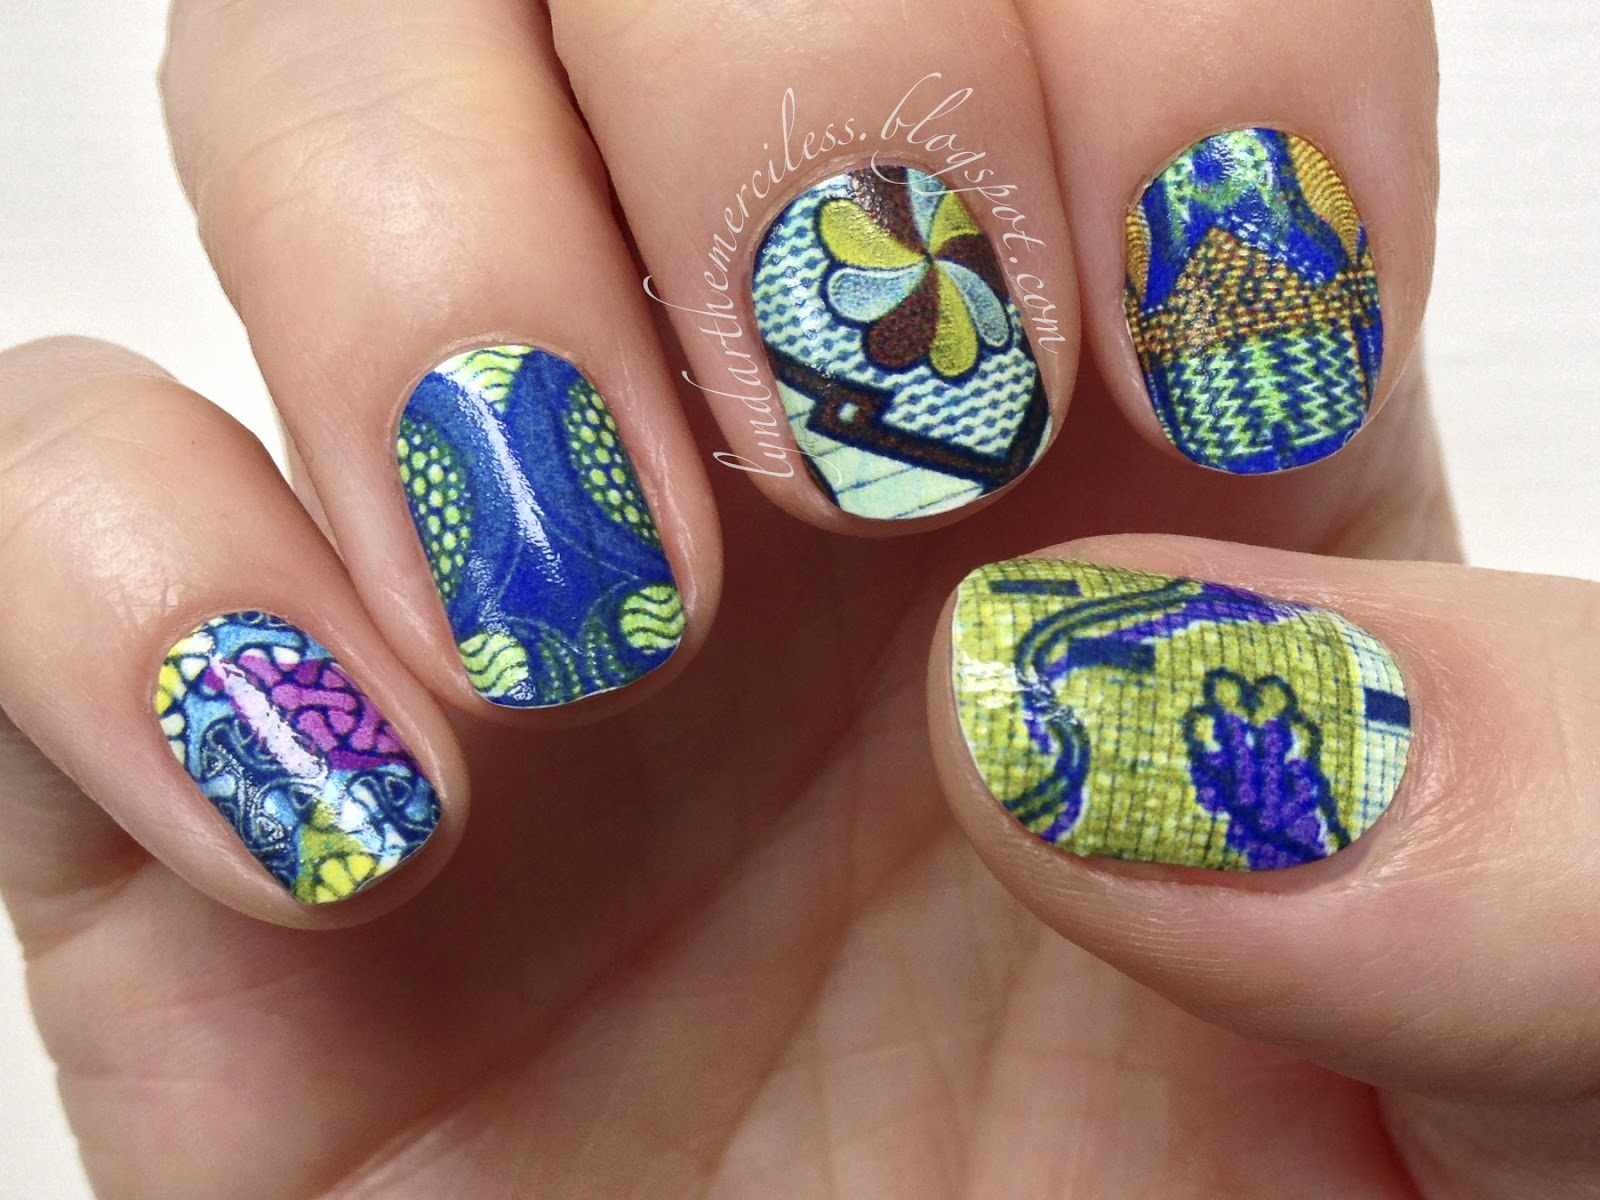 5. Nail wraps for nail art - wide 10